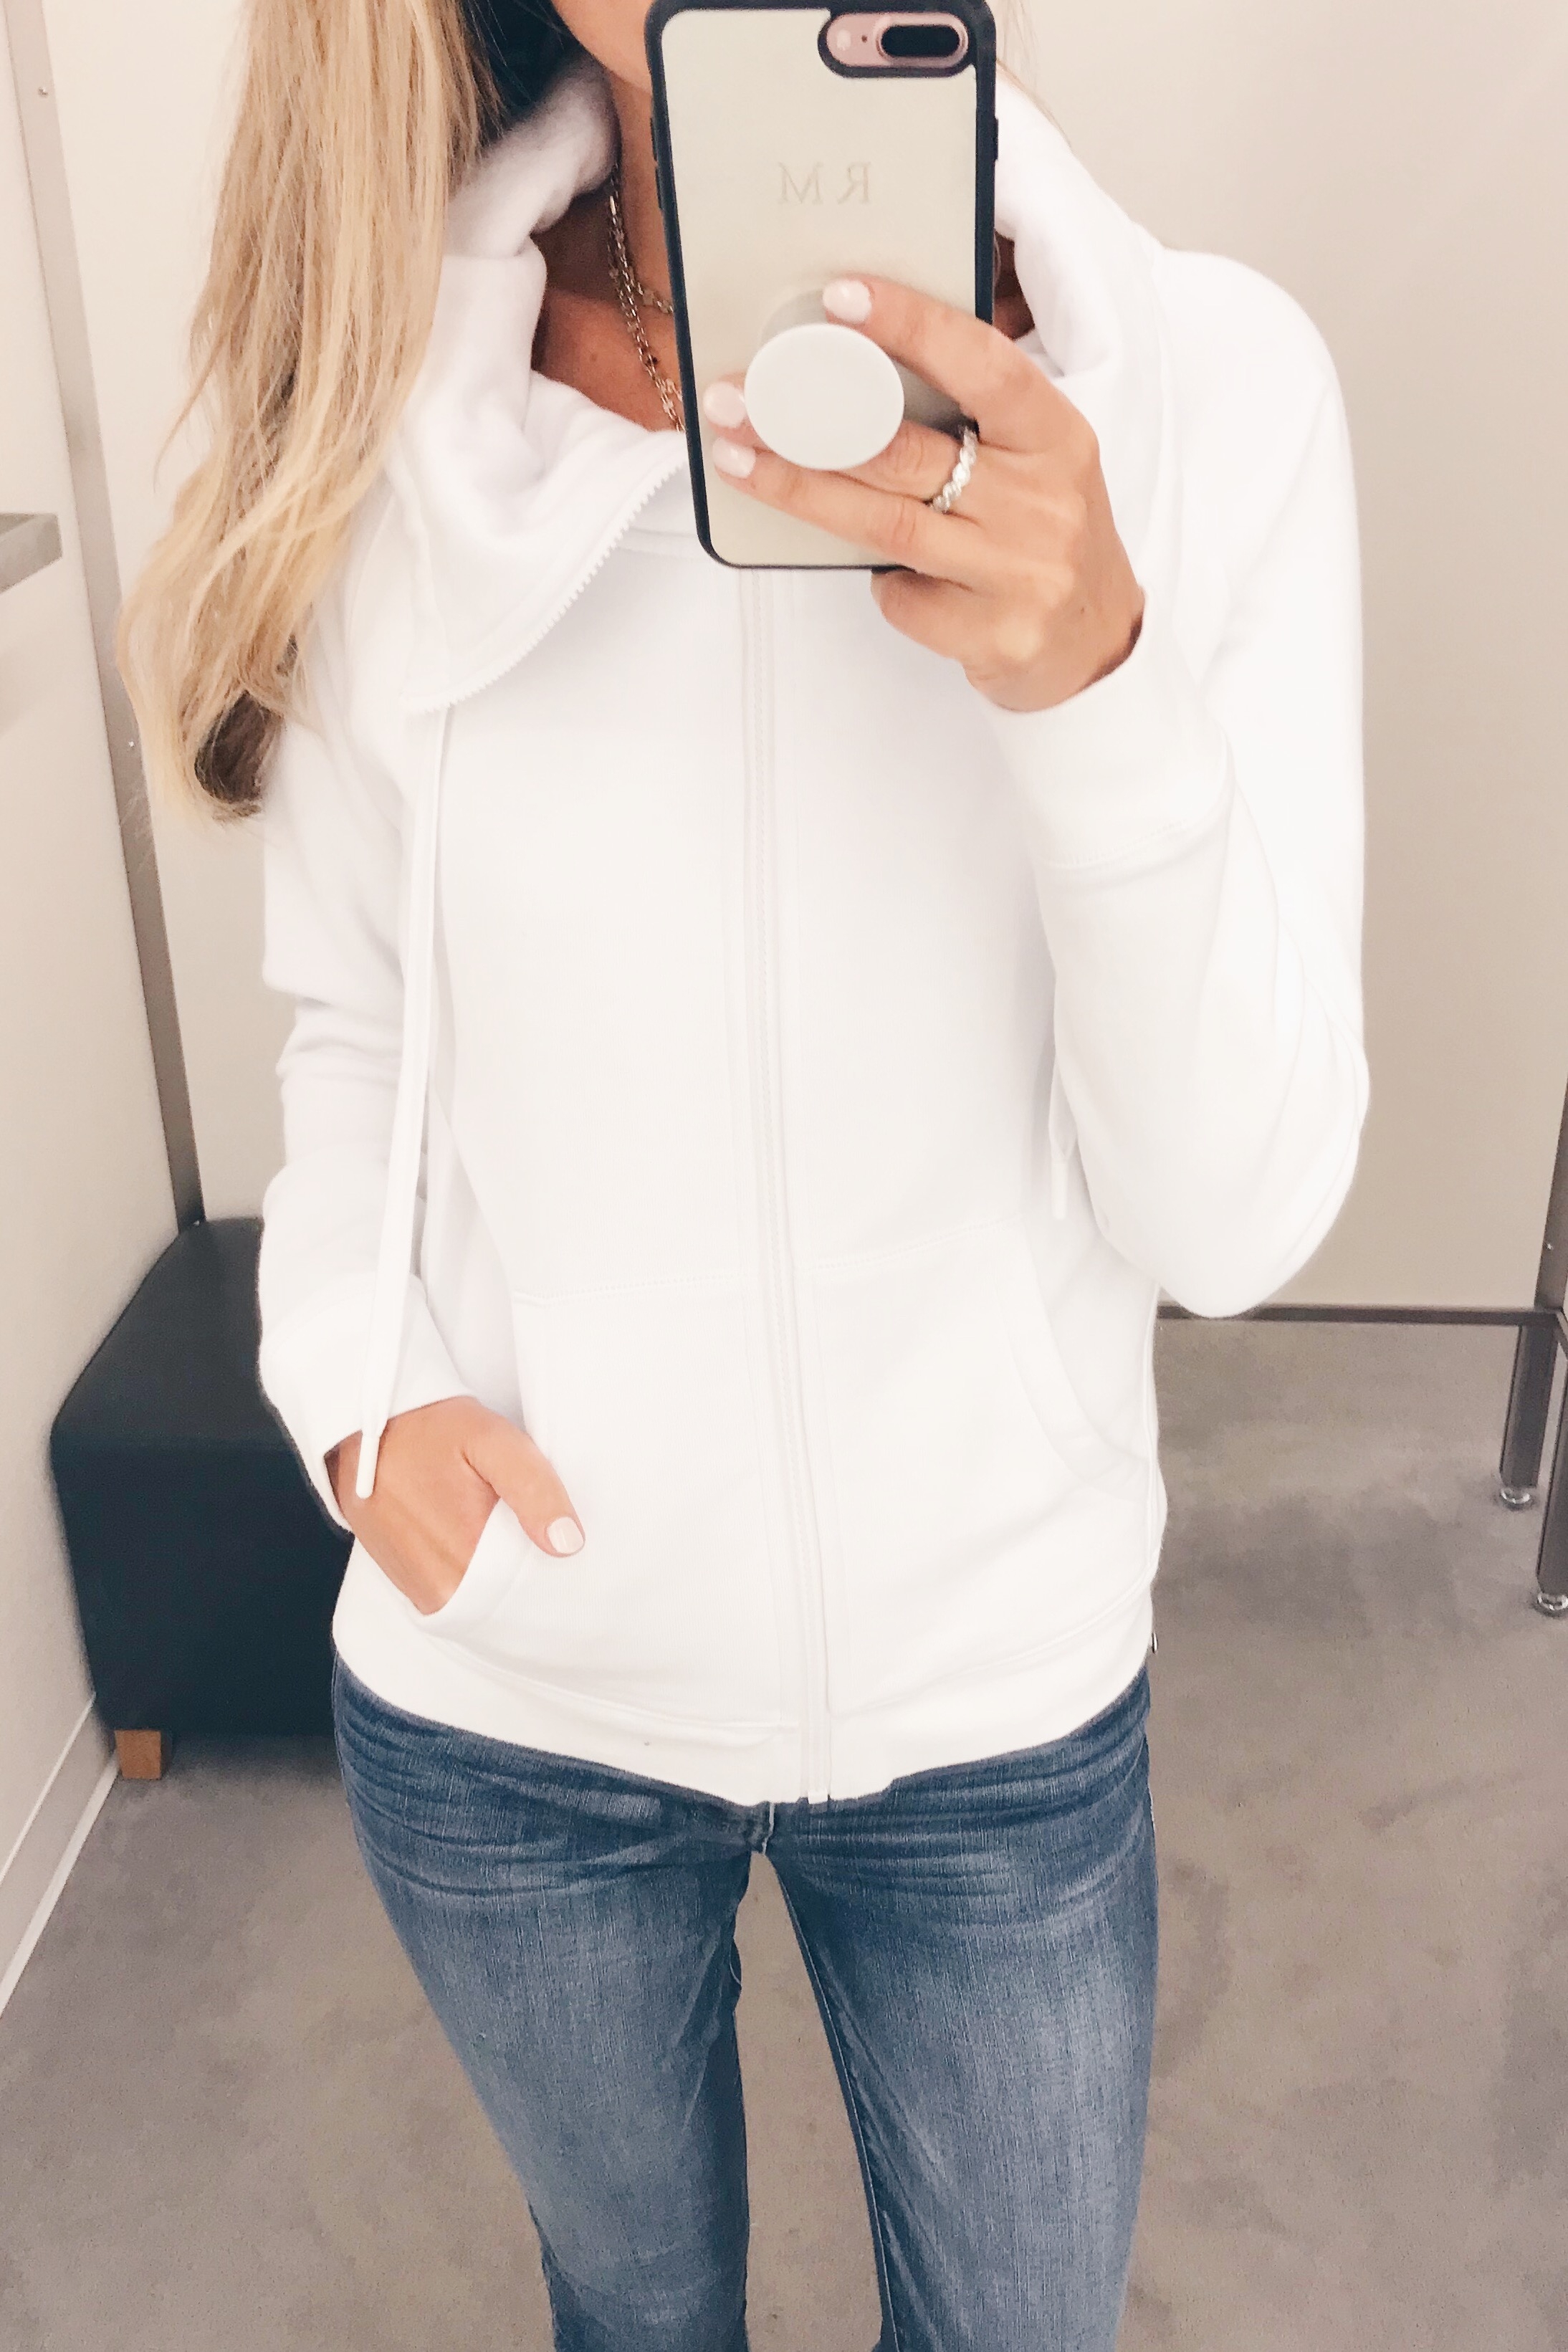 Nordstrom Anniversary Sale 2018 Dressing Room Outfits - White Zip Up Sweatshirt